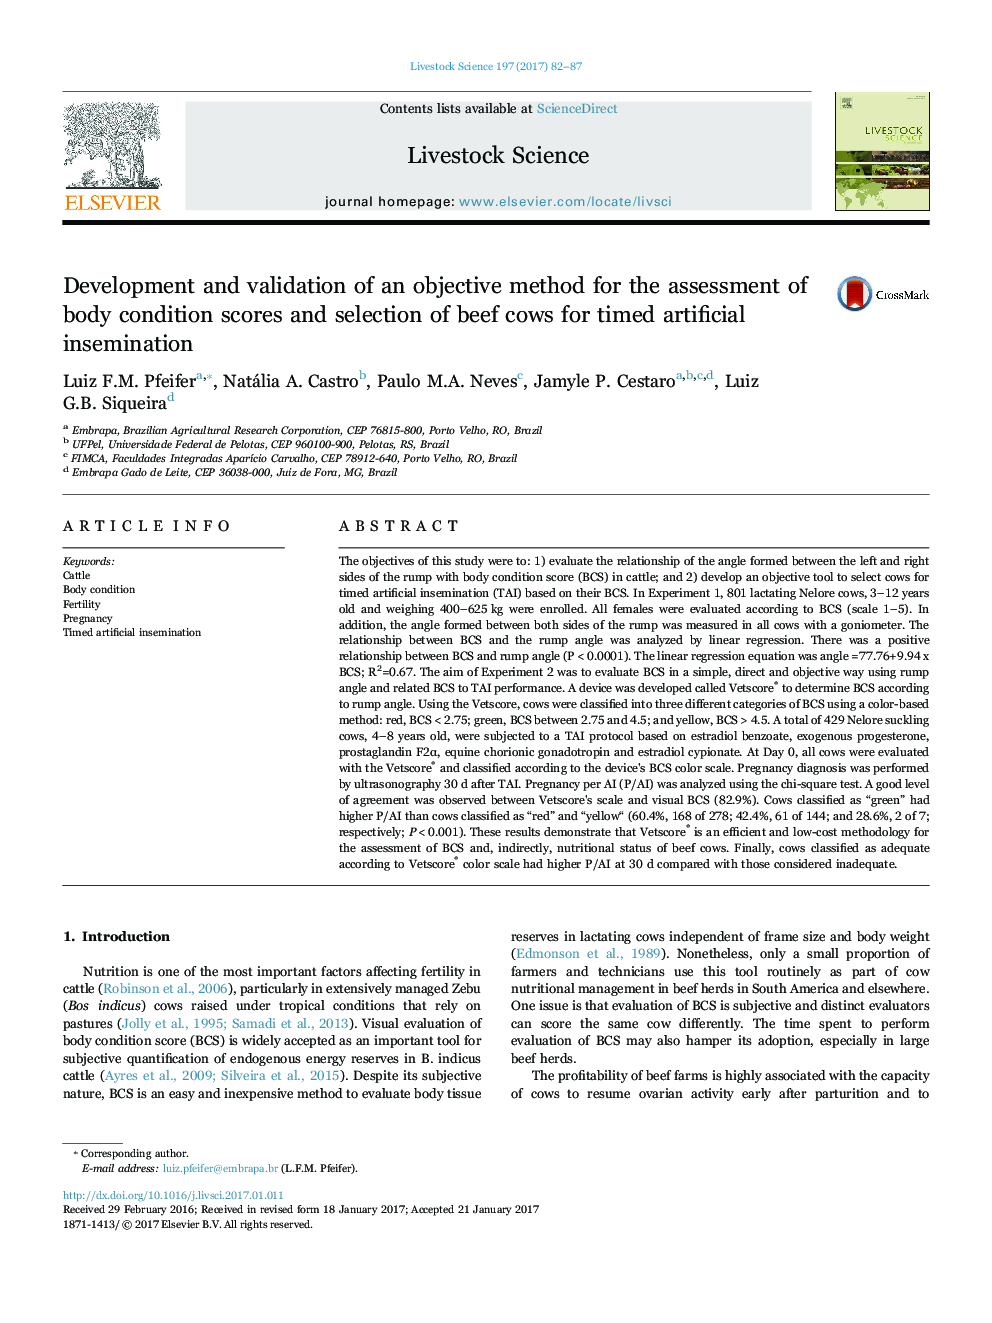 Development and validation of an objective method for the assessment of body condition scores and selection of beef cows for timed artificial insemination